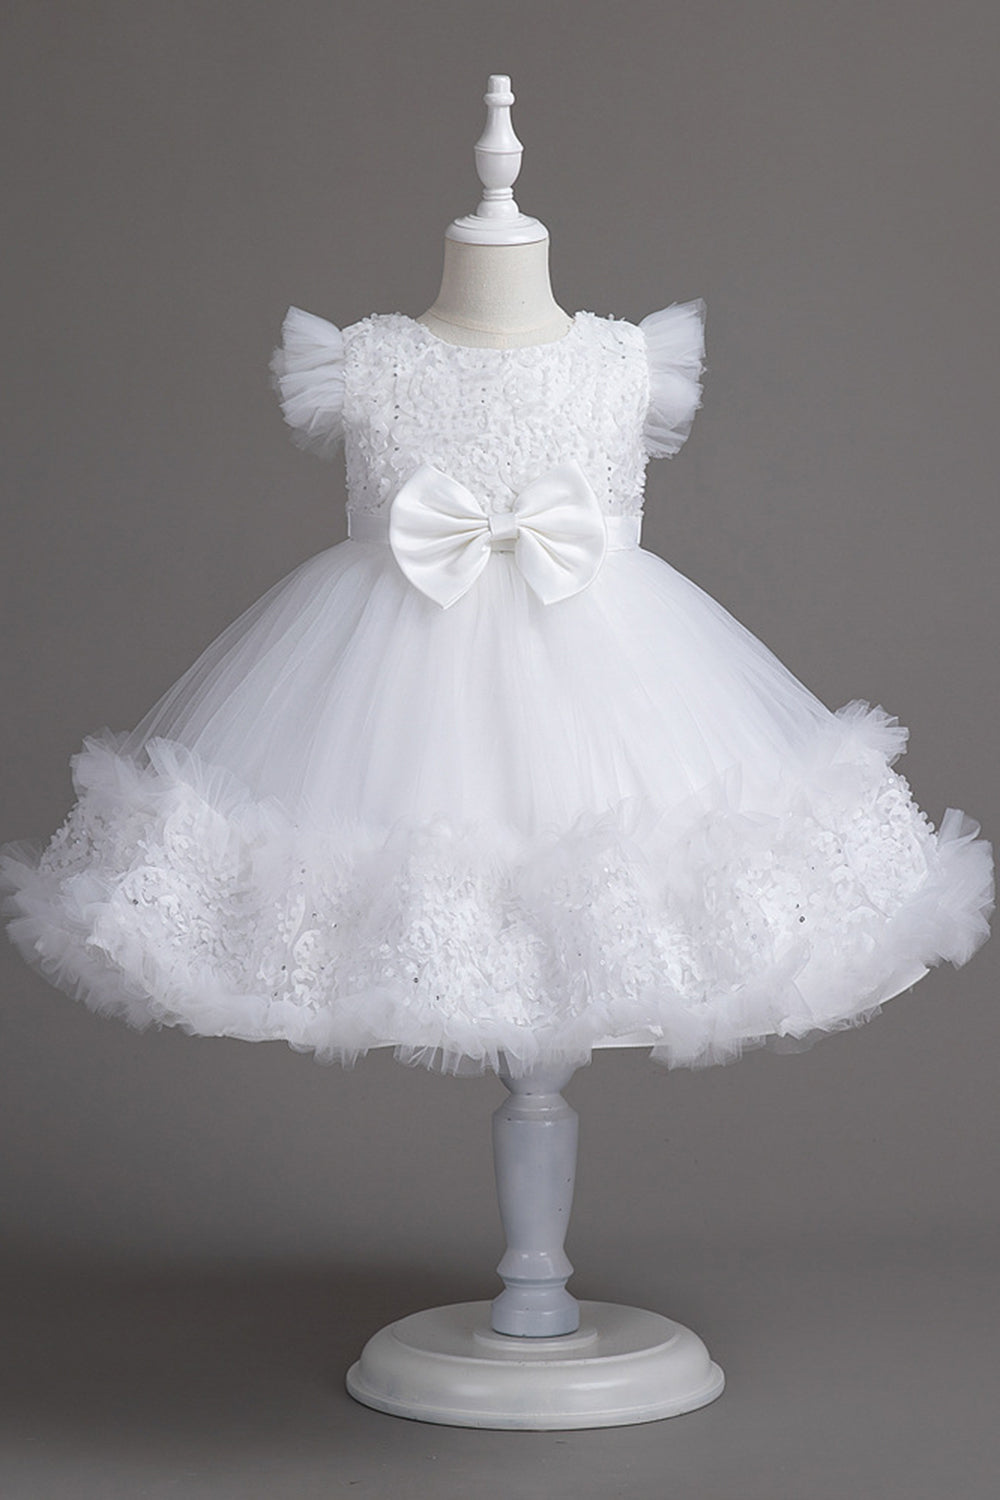 Cute Jewel Neck White Girl Dress with Bowknot